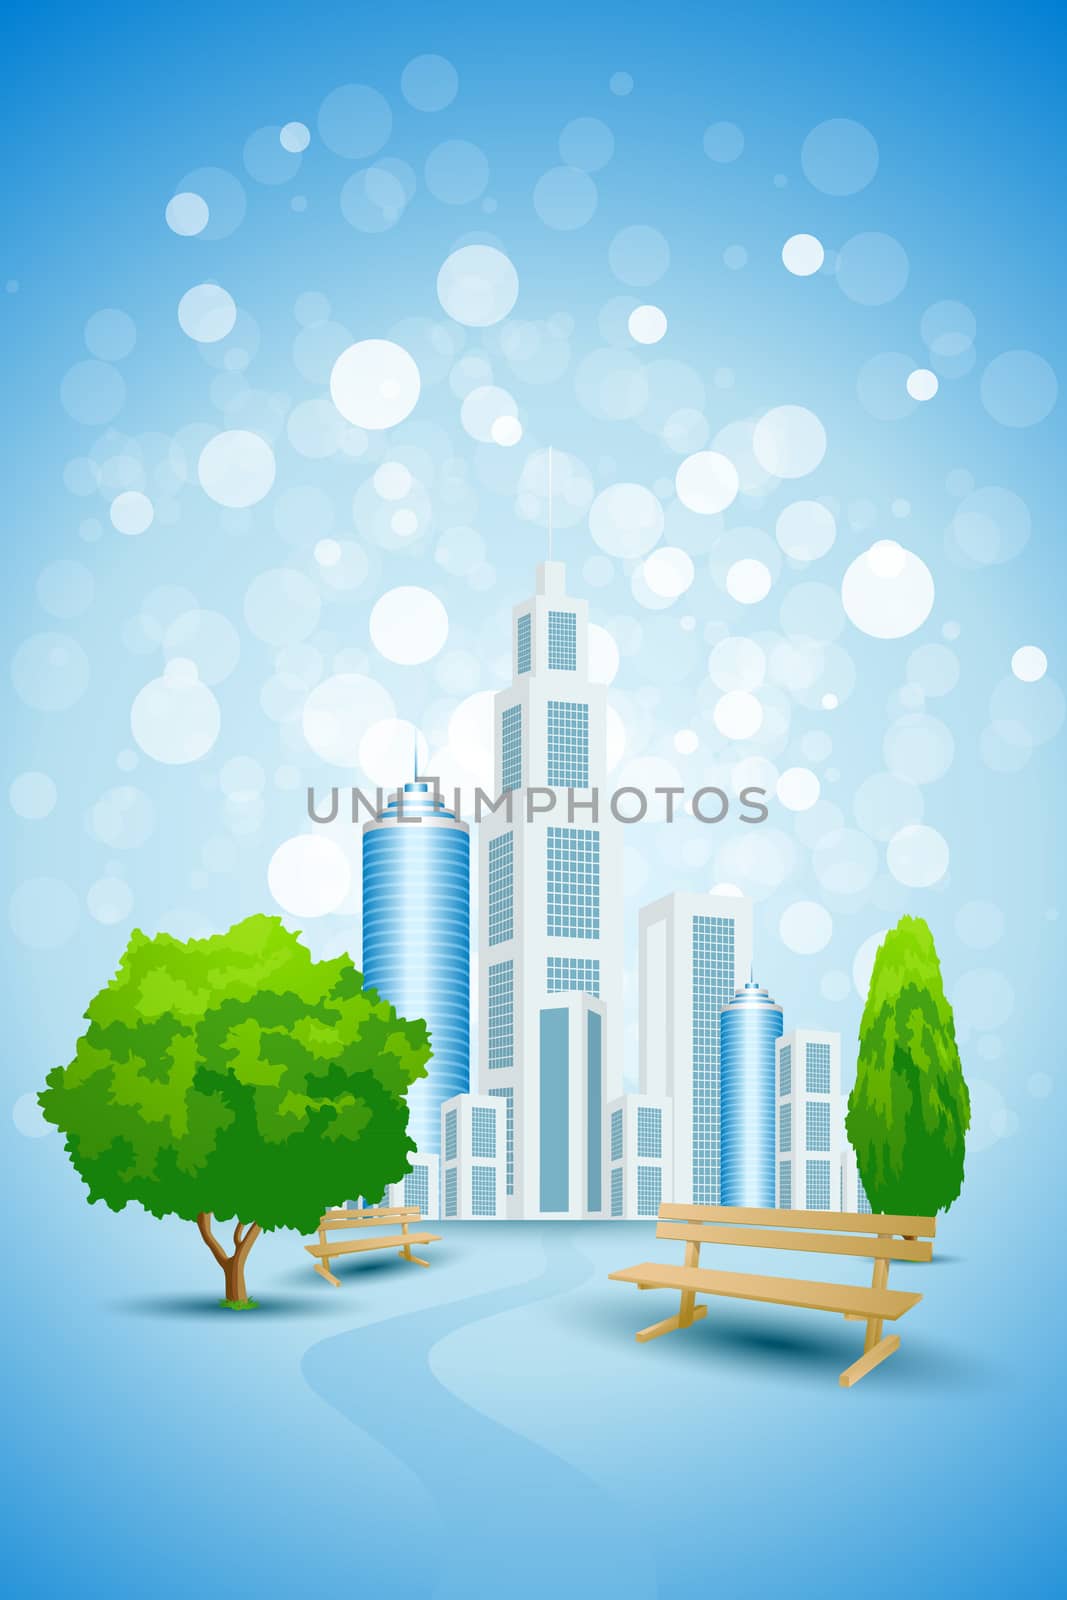 Blue Background with City Landscape Tree Road and Bench